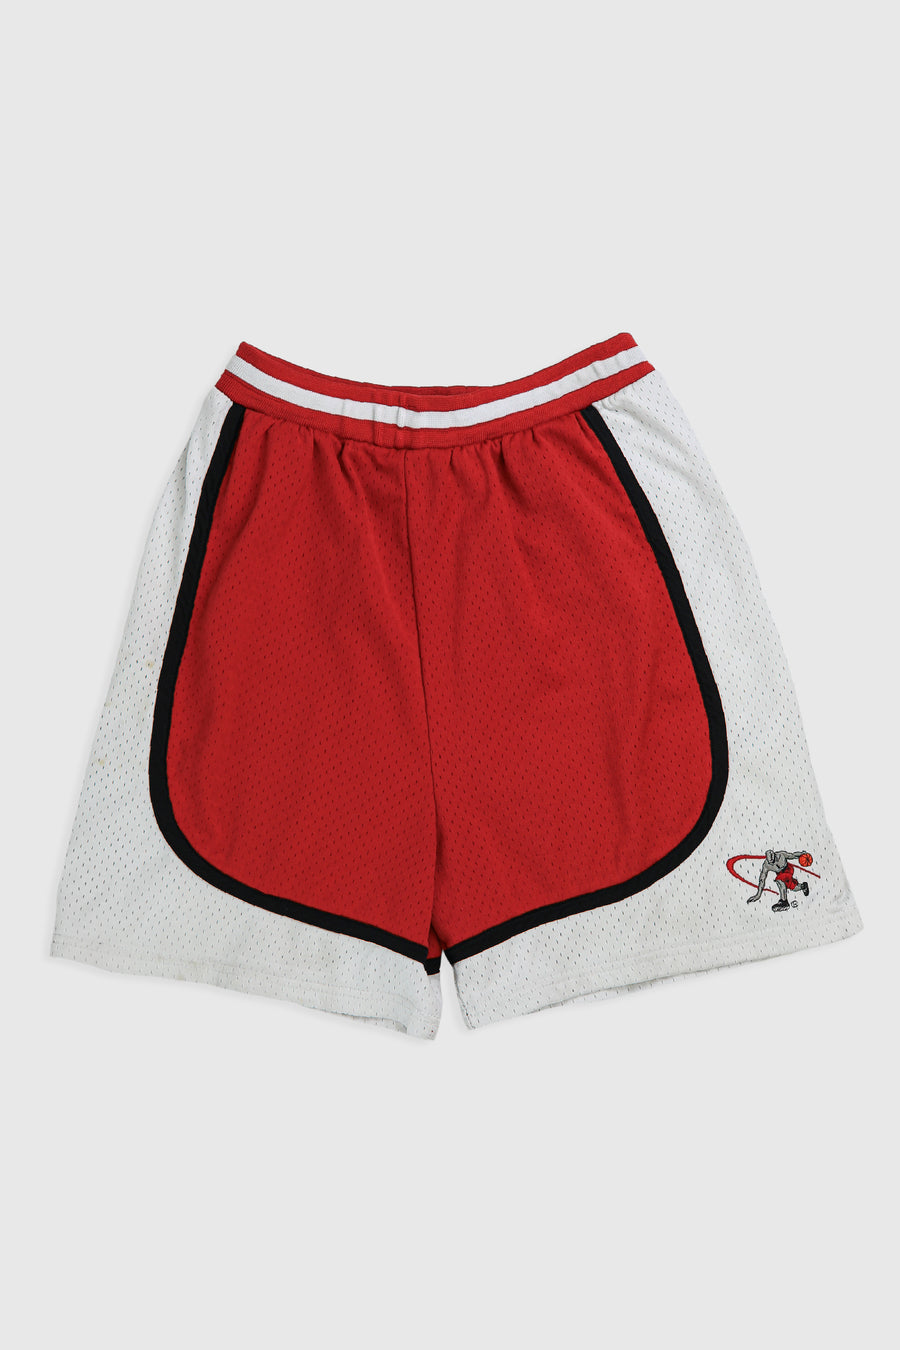 Vintage AND1 Shorts